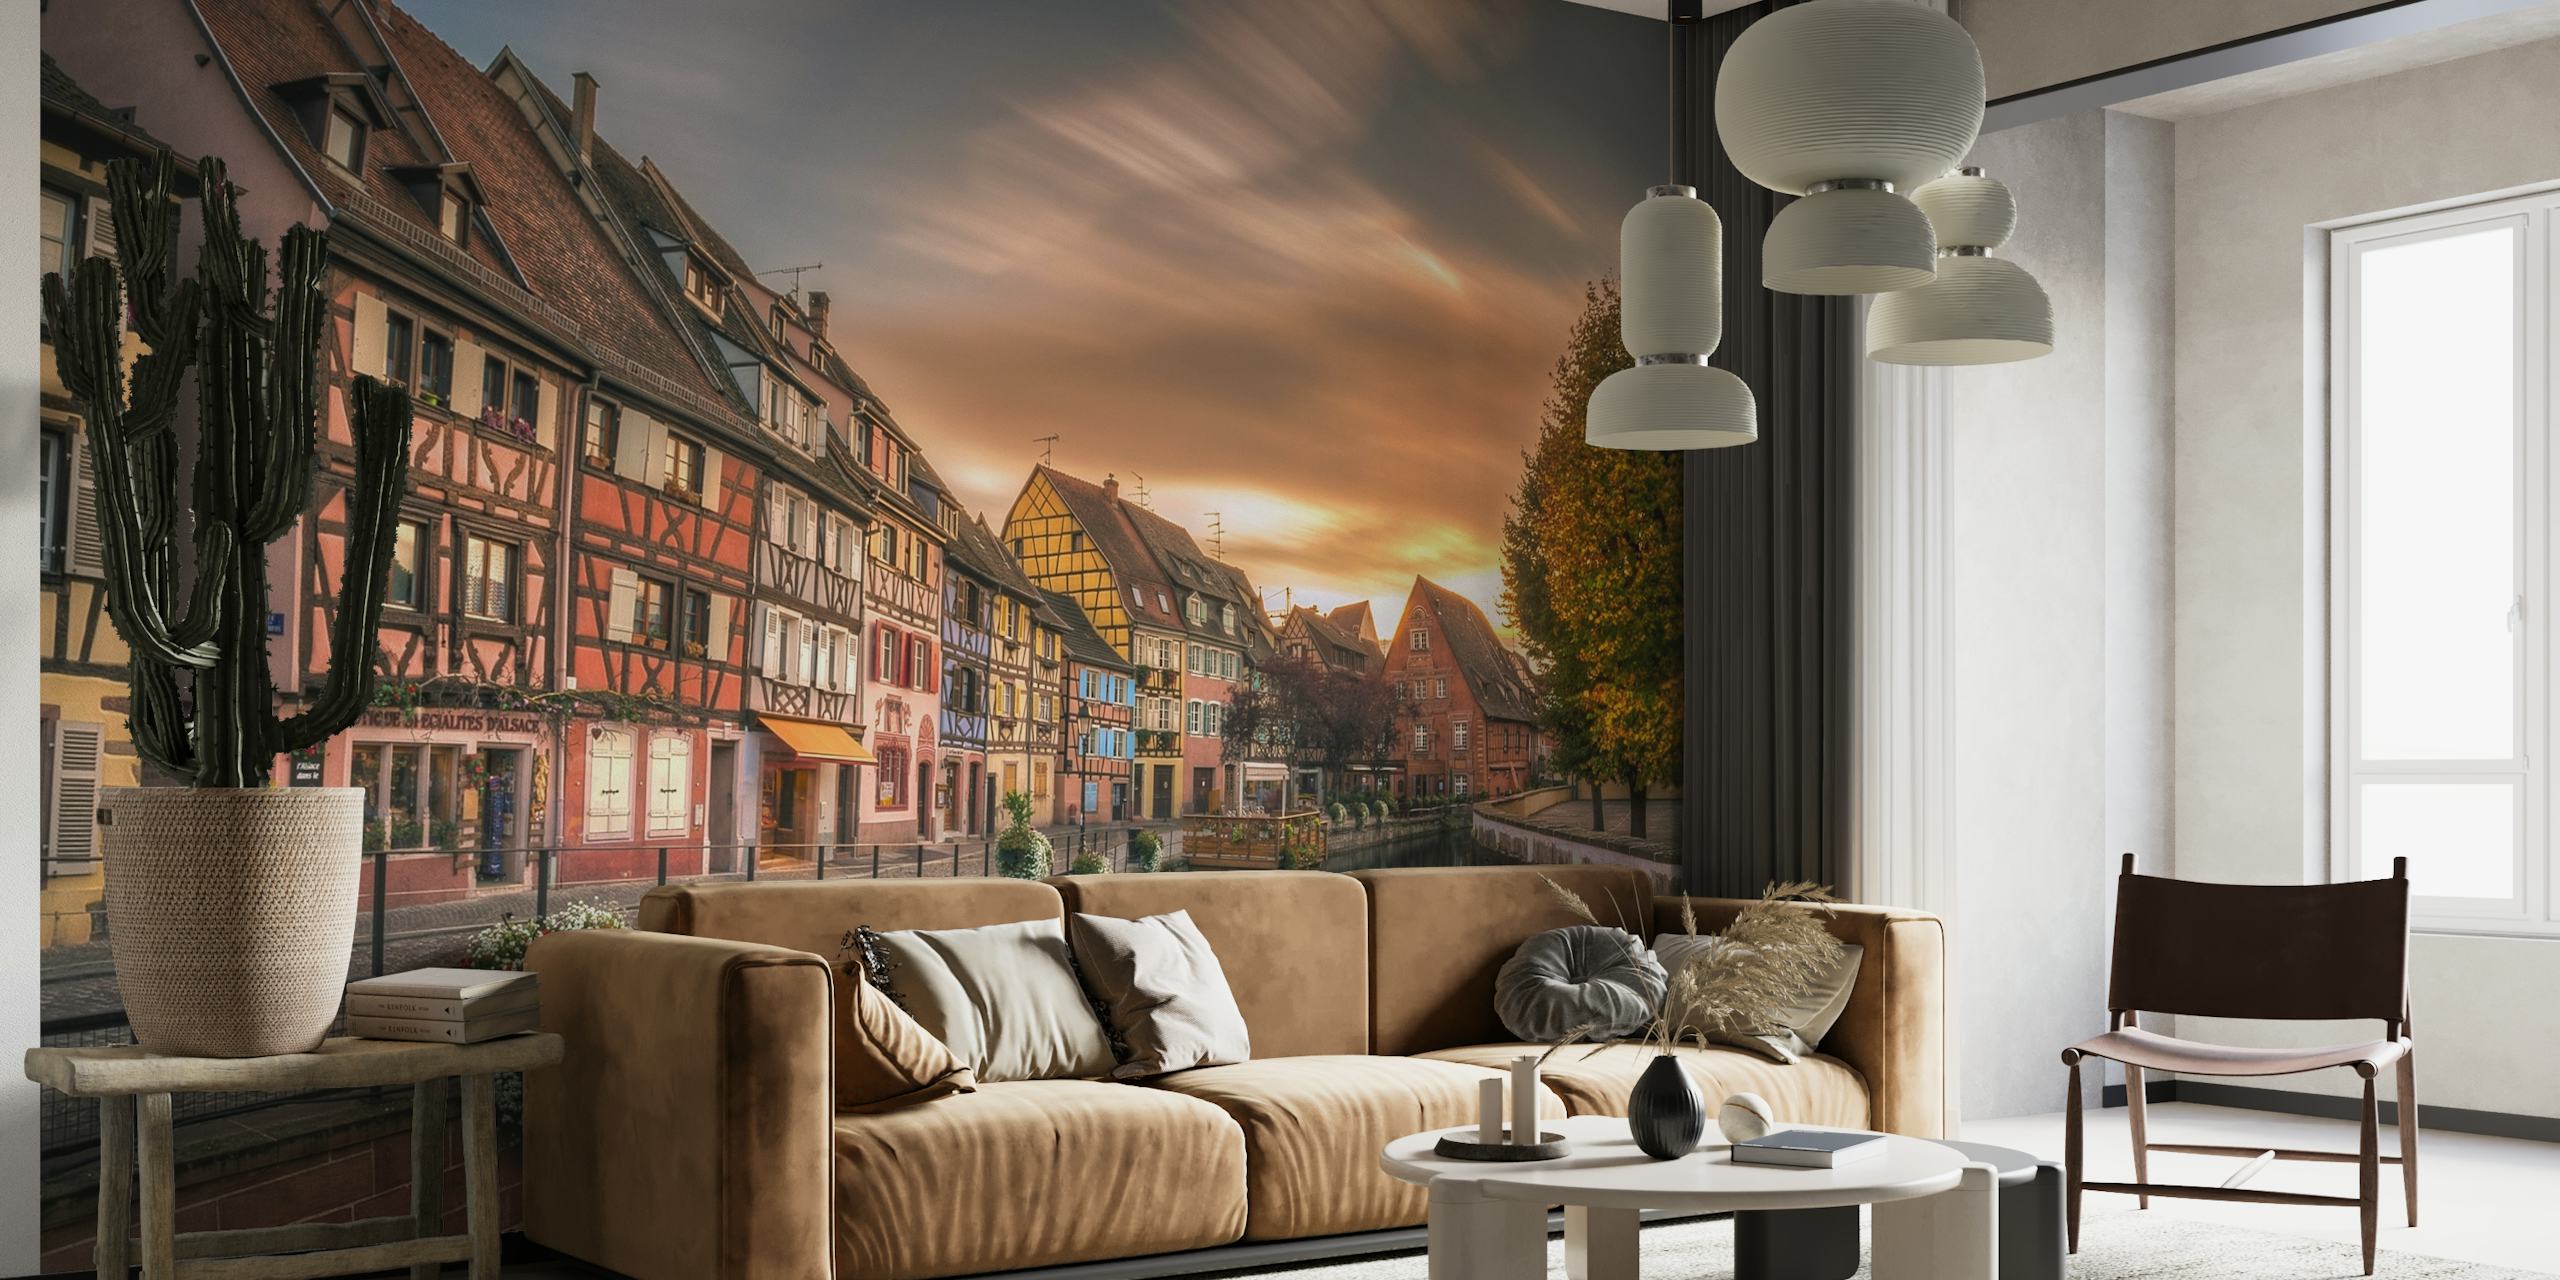 Colmar autumn scene wall mural with historic houses and fall colors